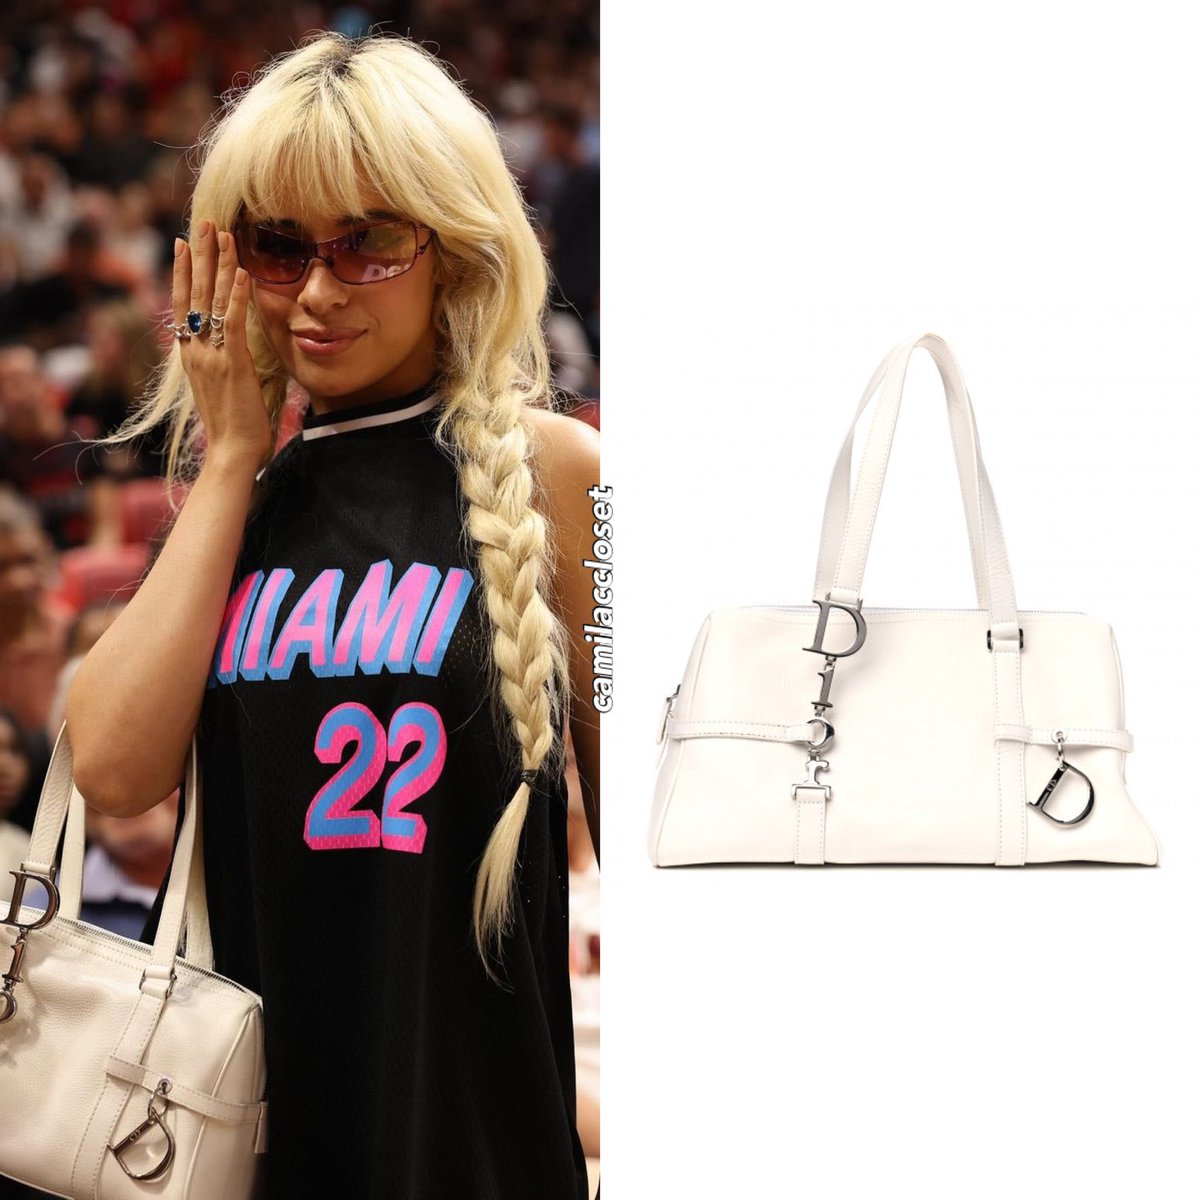 #CamilaCabello wore a custom #MiamiHeat jersey (not available), and a vintage #ChristianDior bag (not available) at the Miami Heat game!